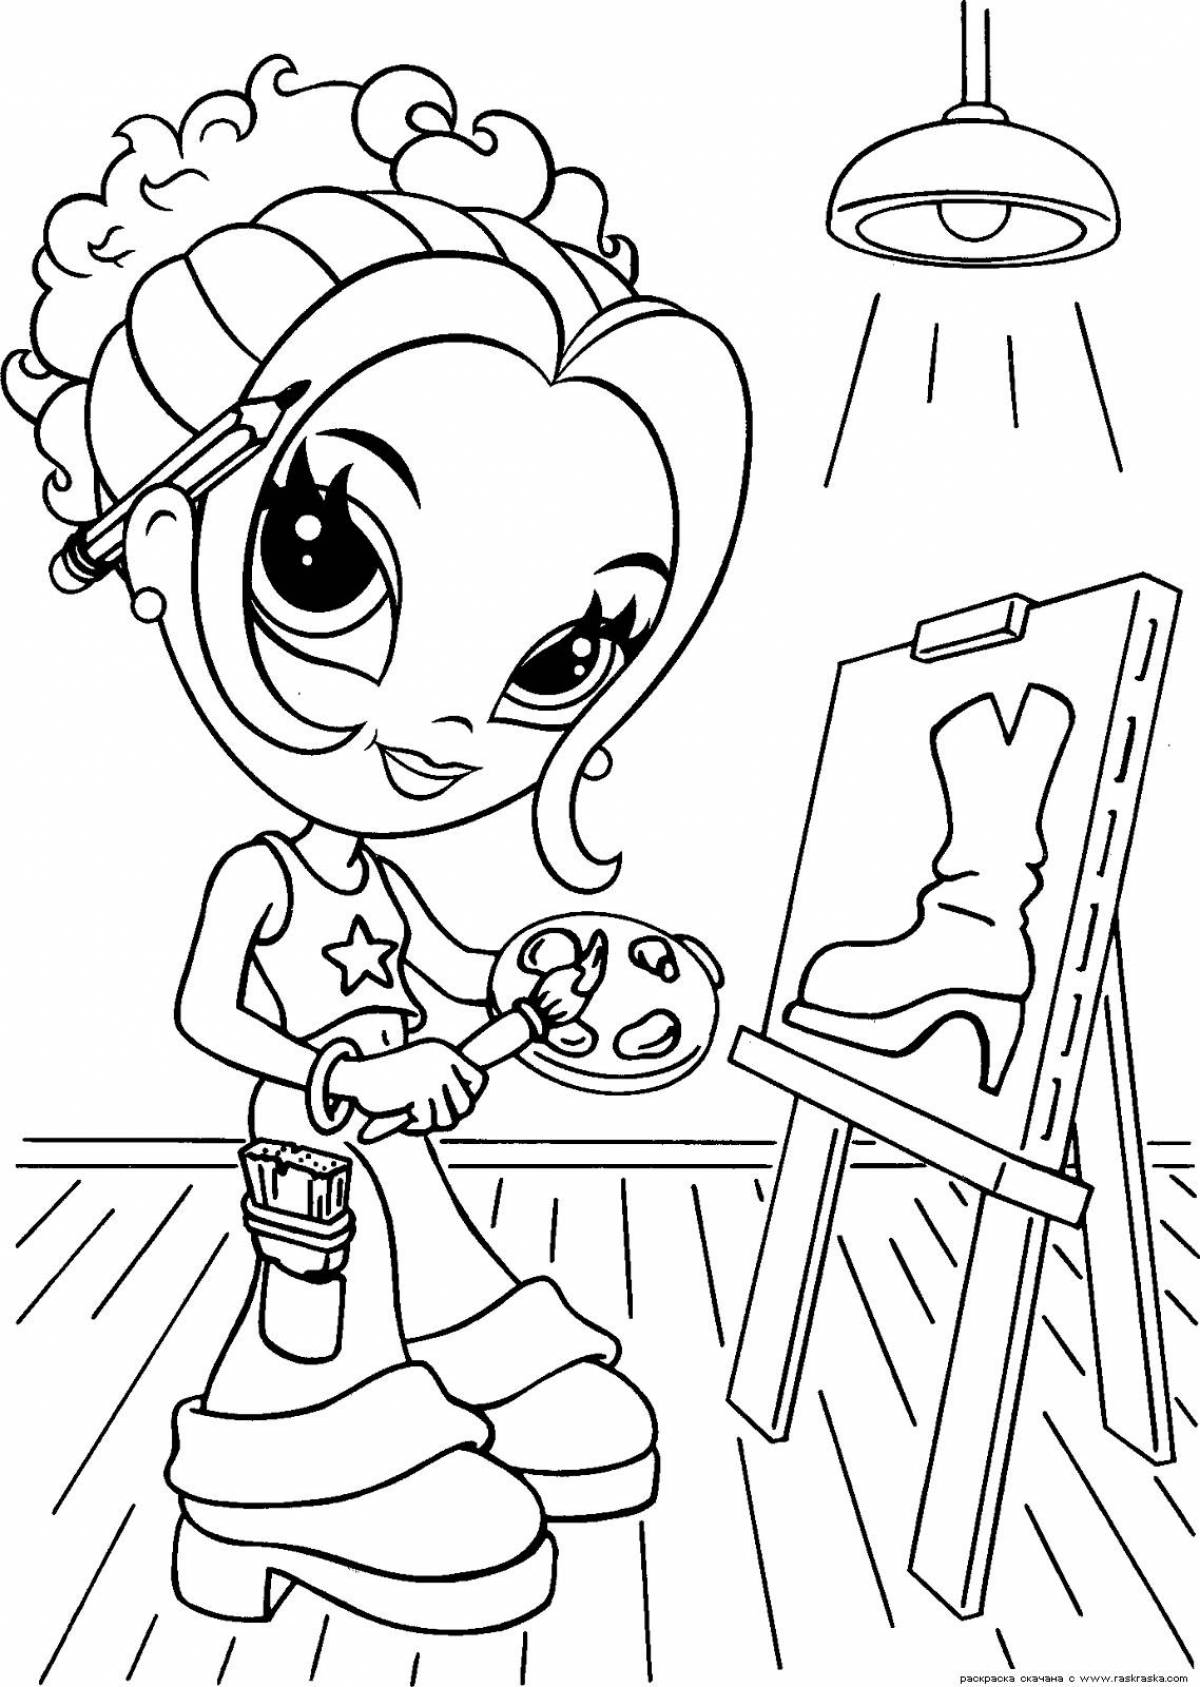 Enable magic coloring